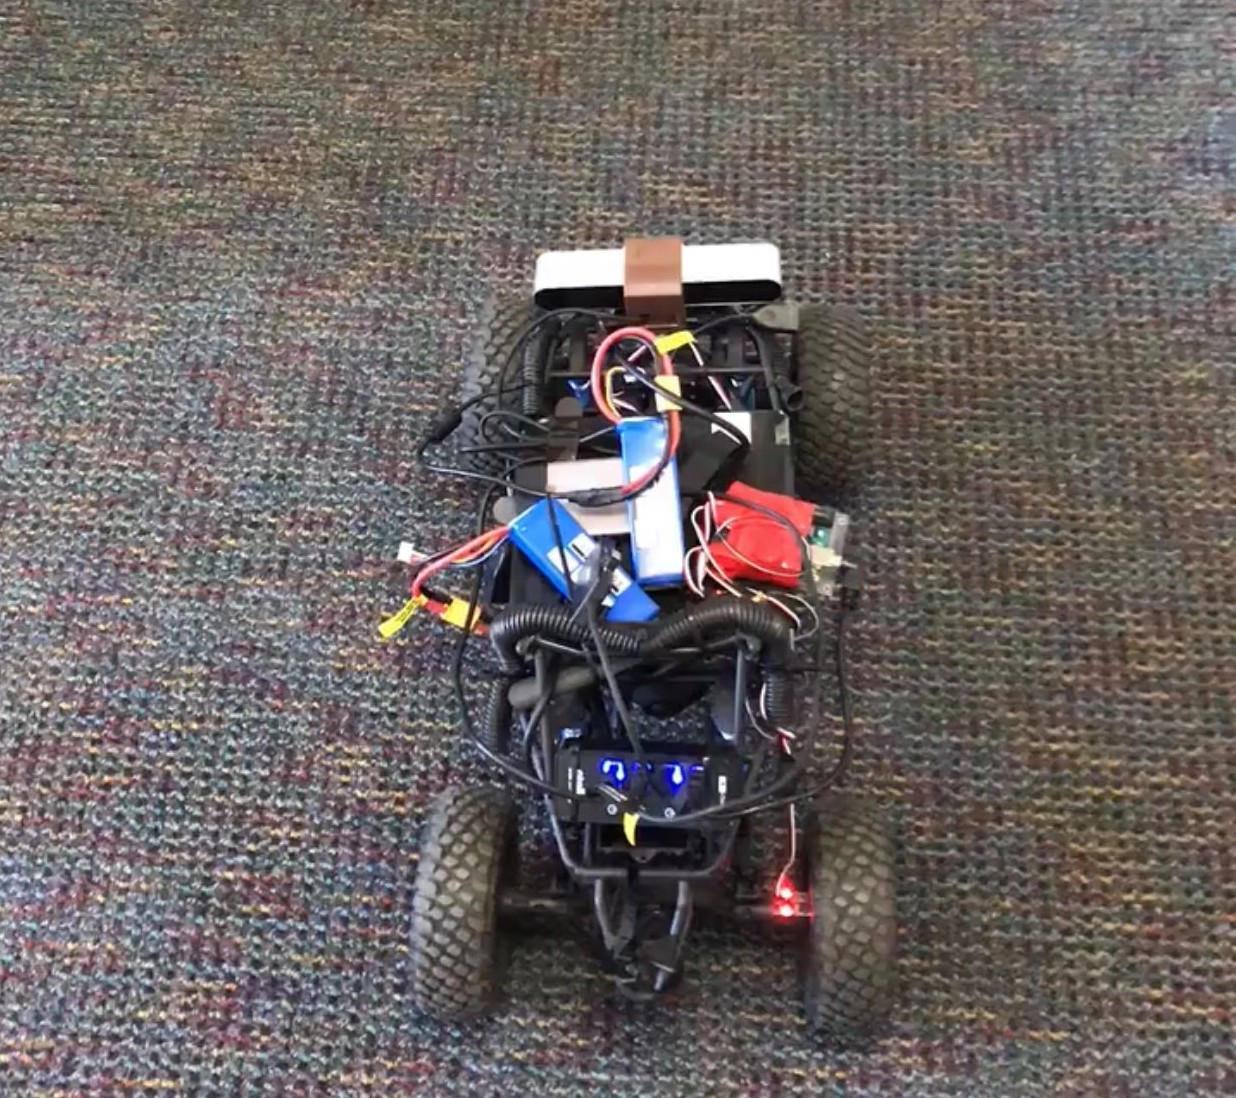 top view of RC car with camera and electronics. Video is of it driving in a hallway, avoiding the side walls